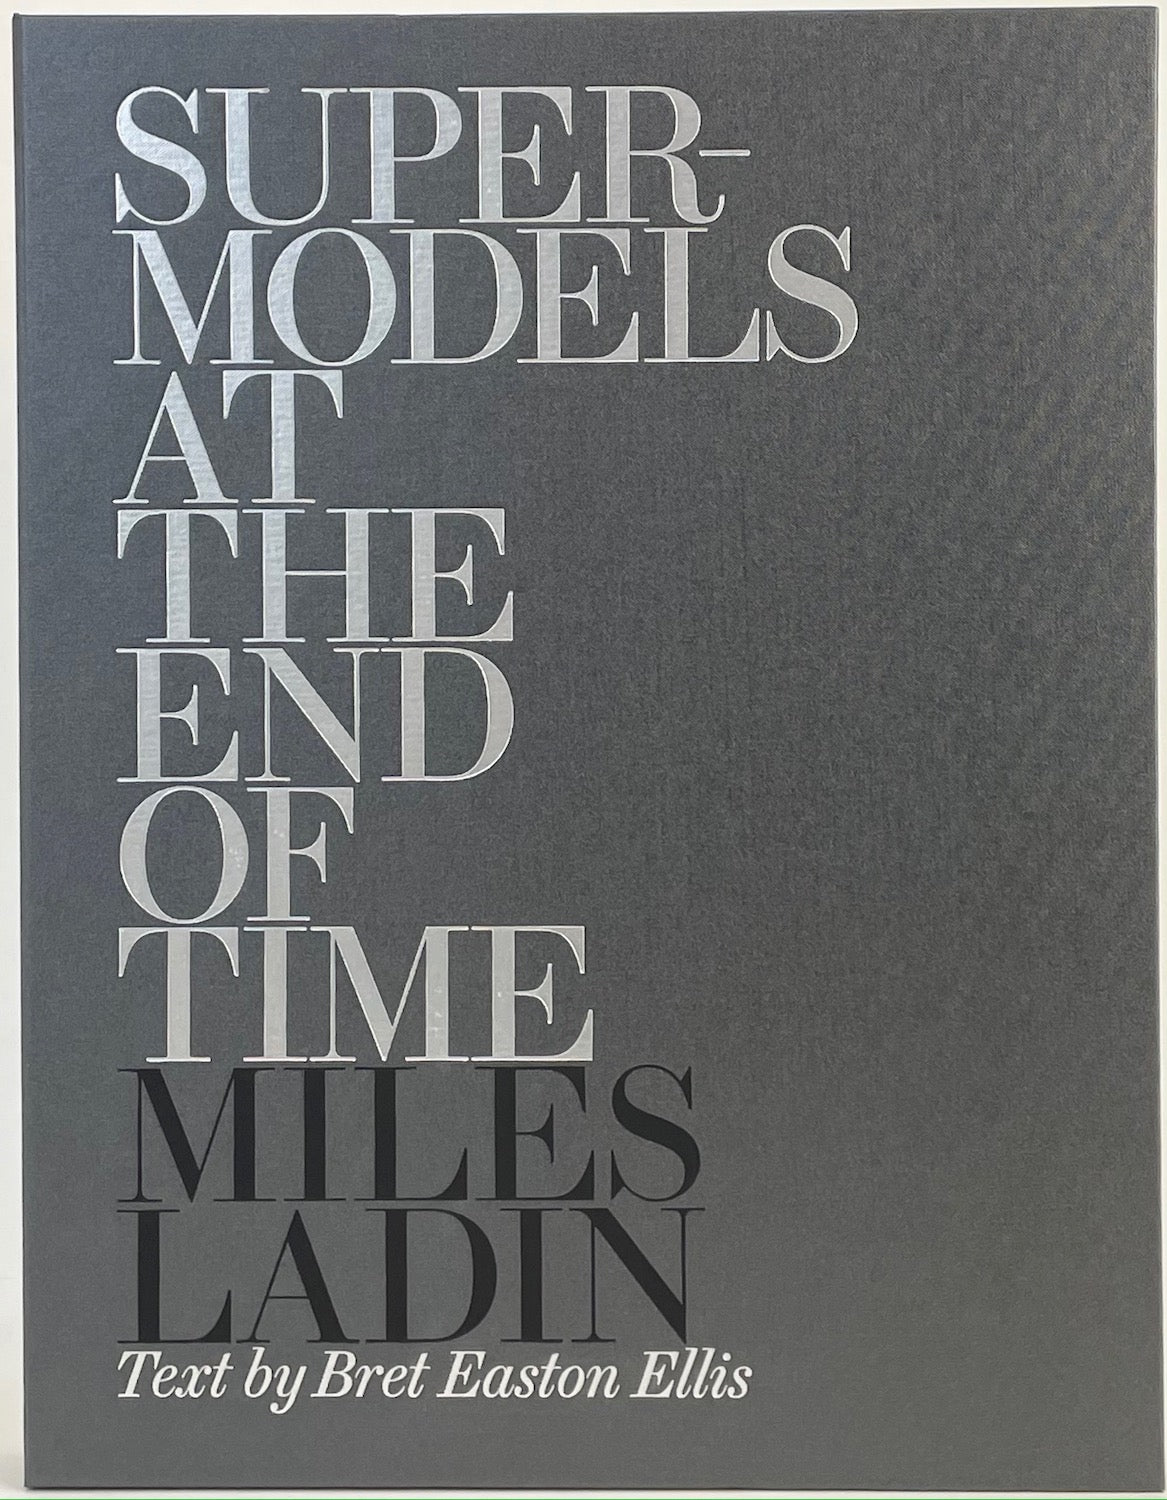 Ladin, Miles. Supermodels at the End of Time - Artist’s Book